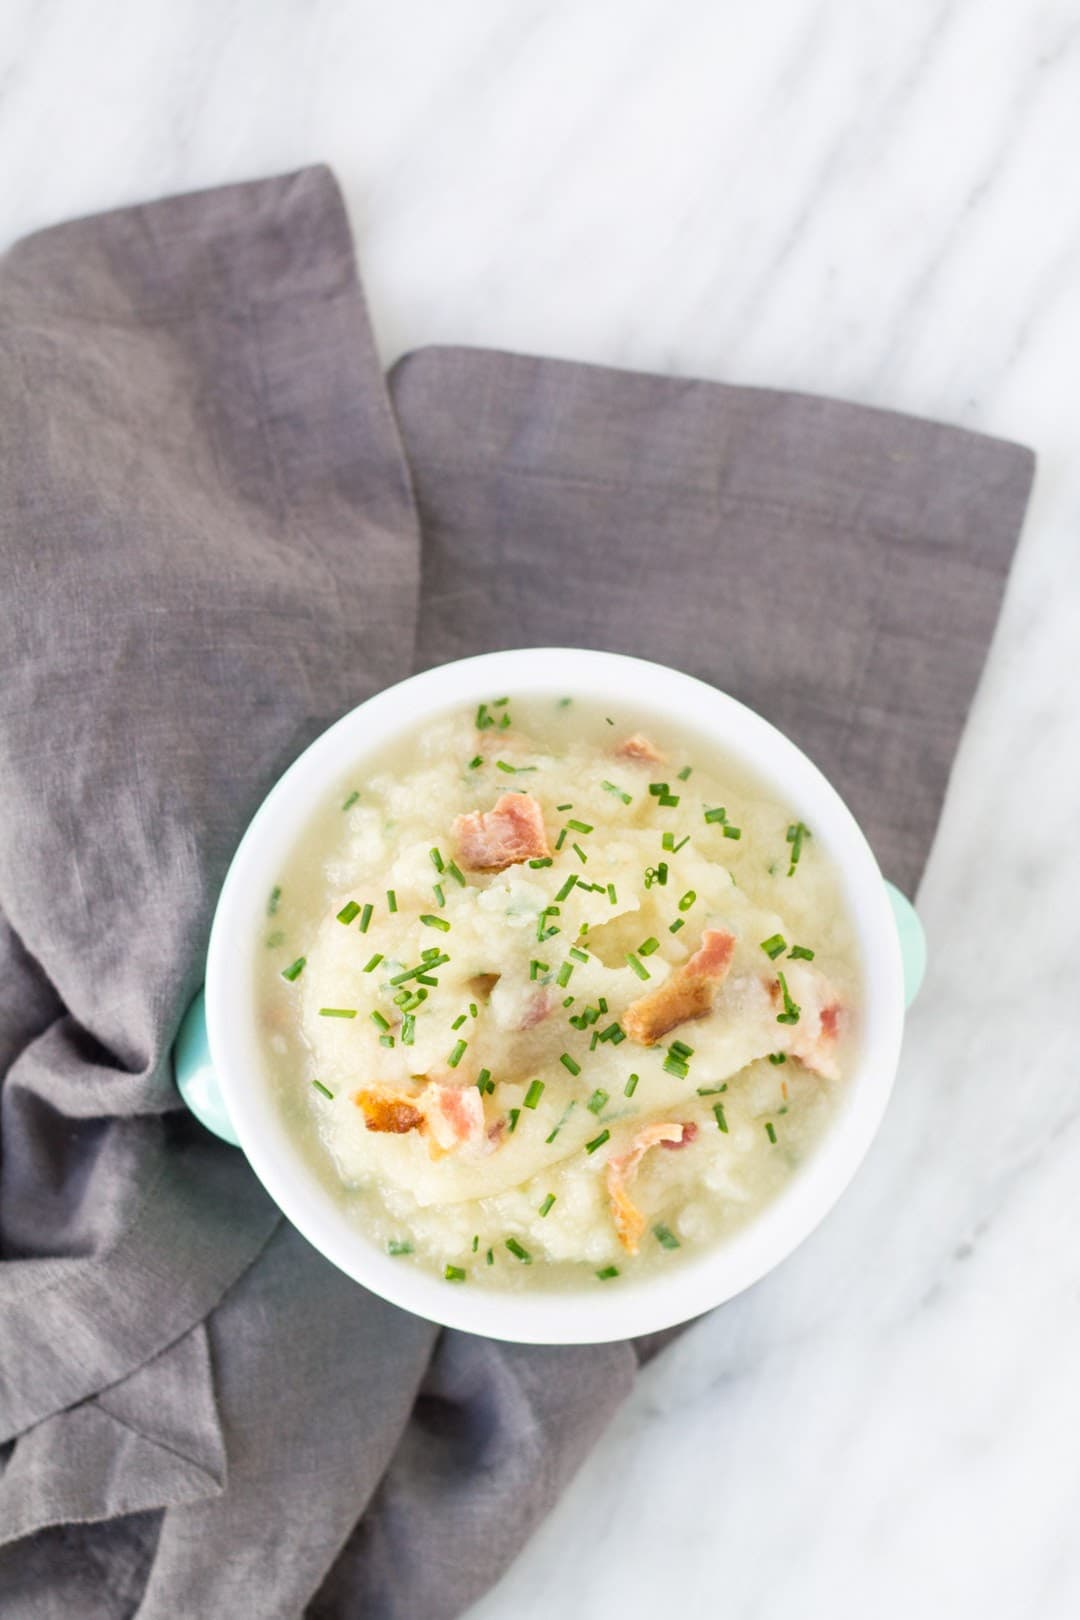 Low FODMAP mashed turnips with bacon